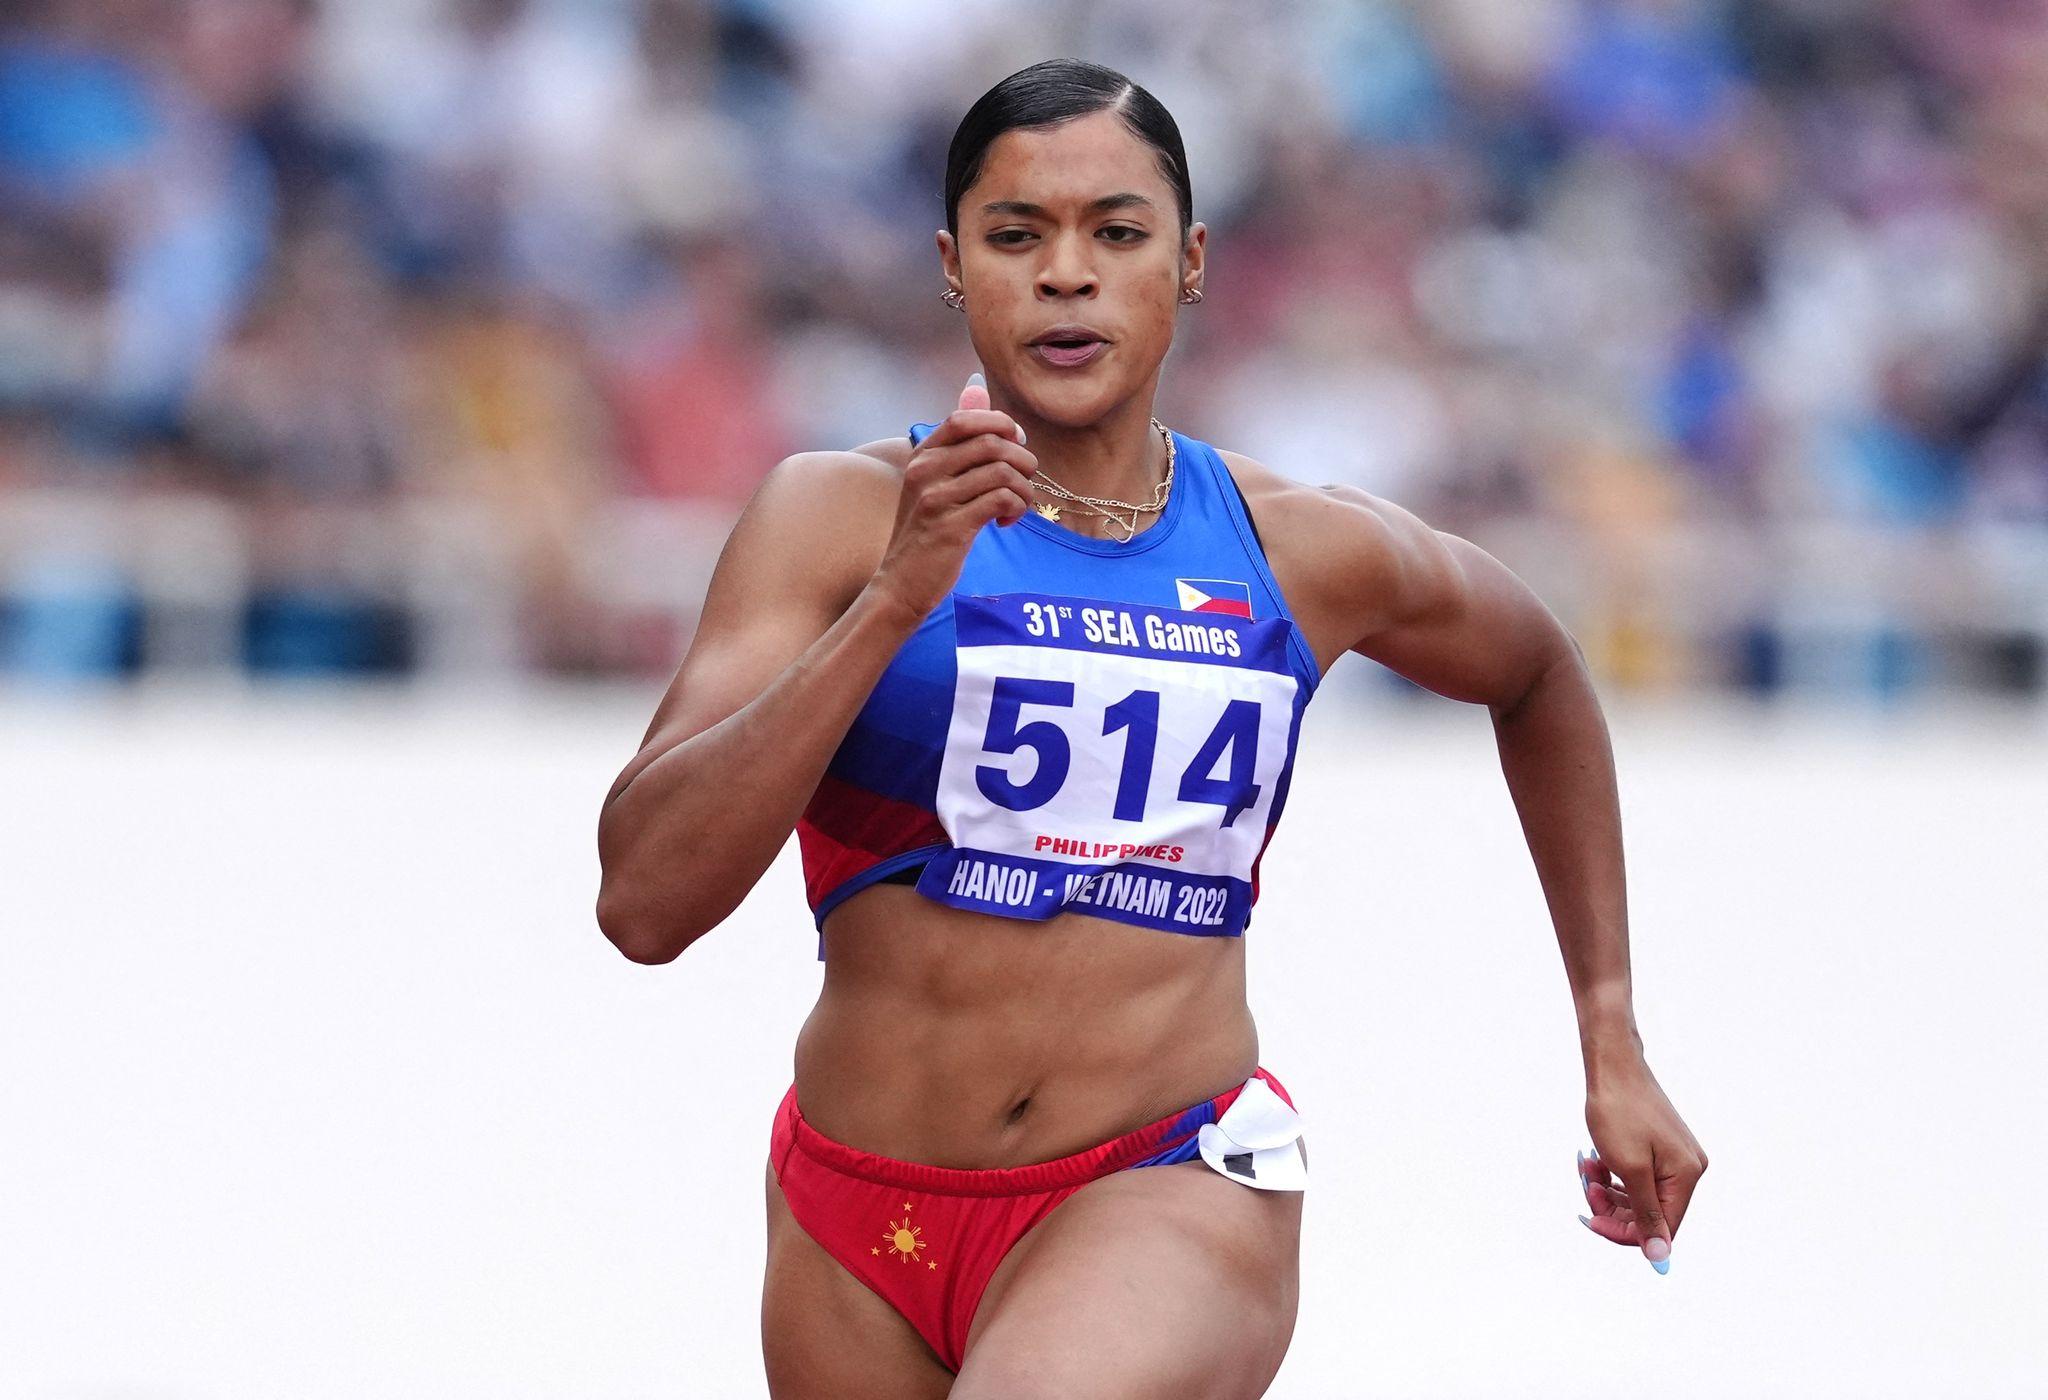 Kayla Richardson triumphant in womens 100m dash to hike Philippines medal haul GMA News Online